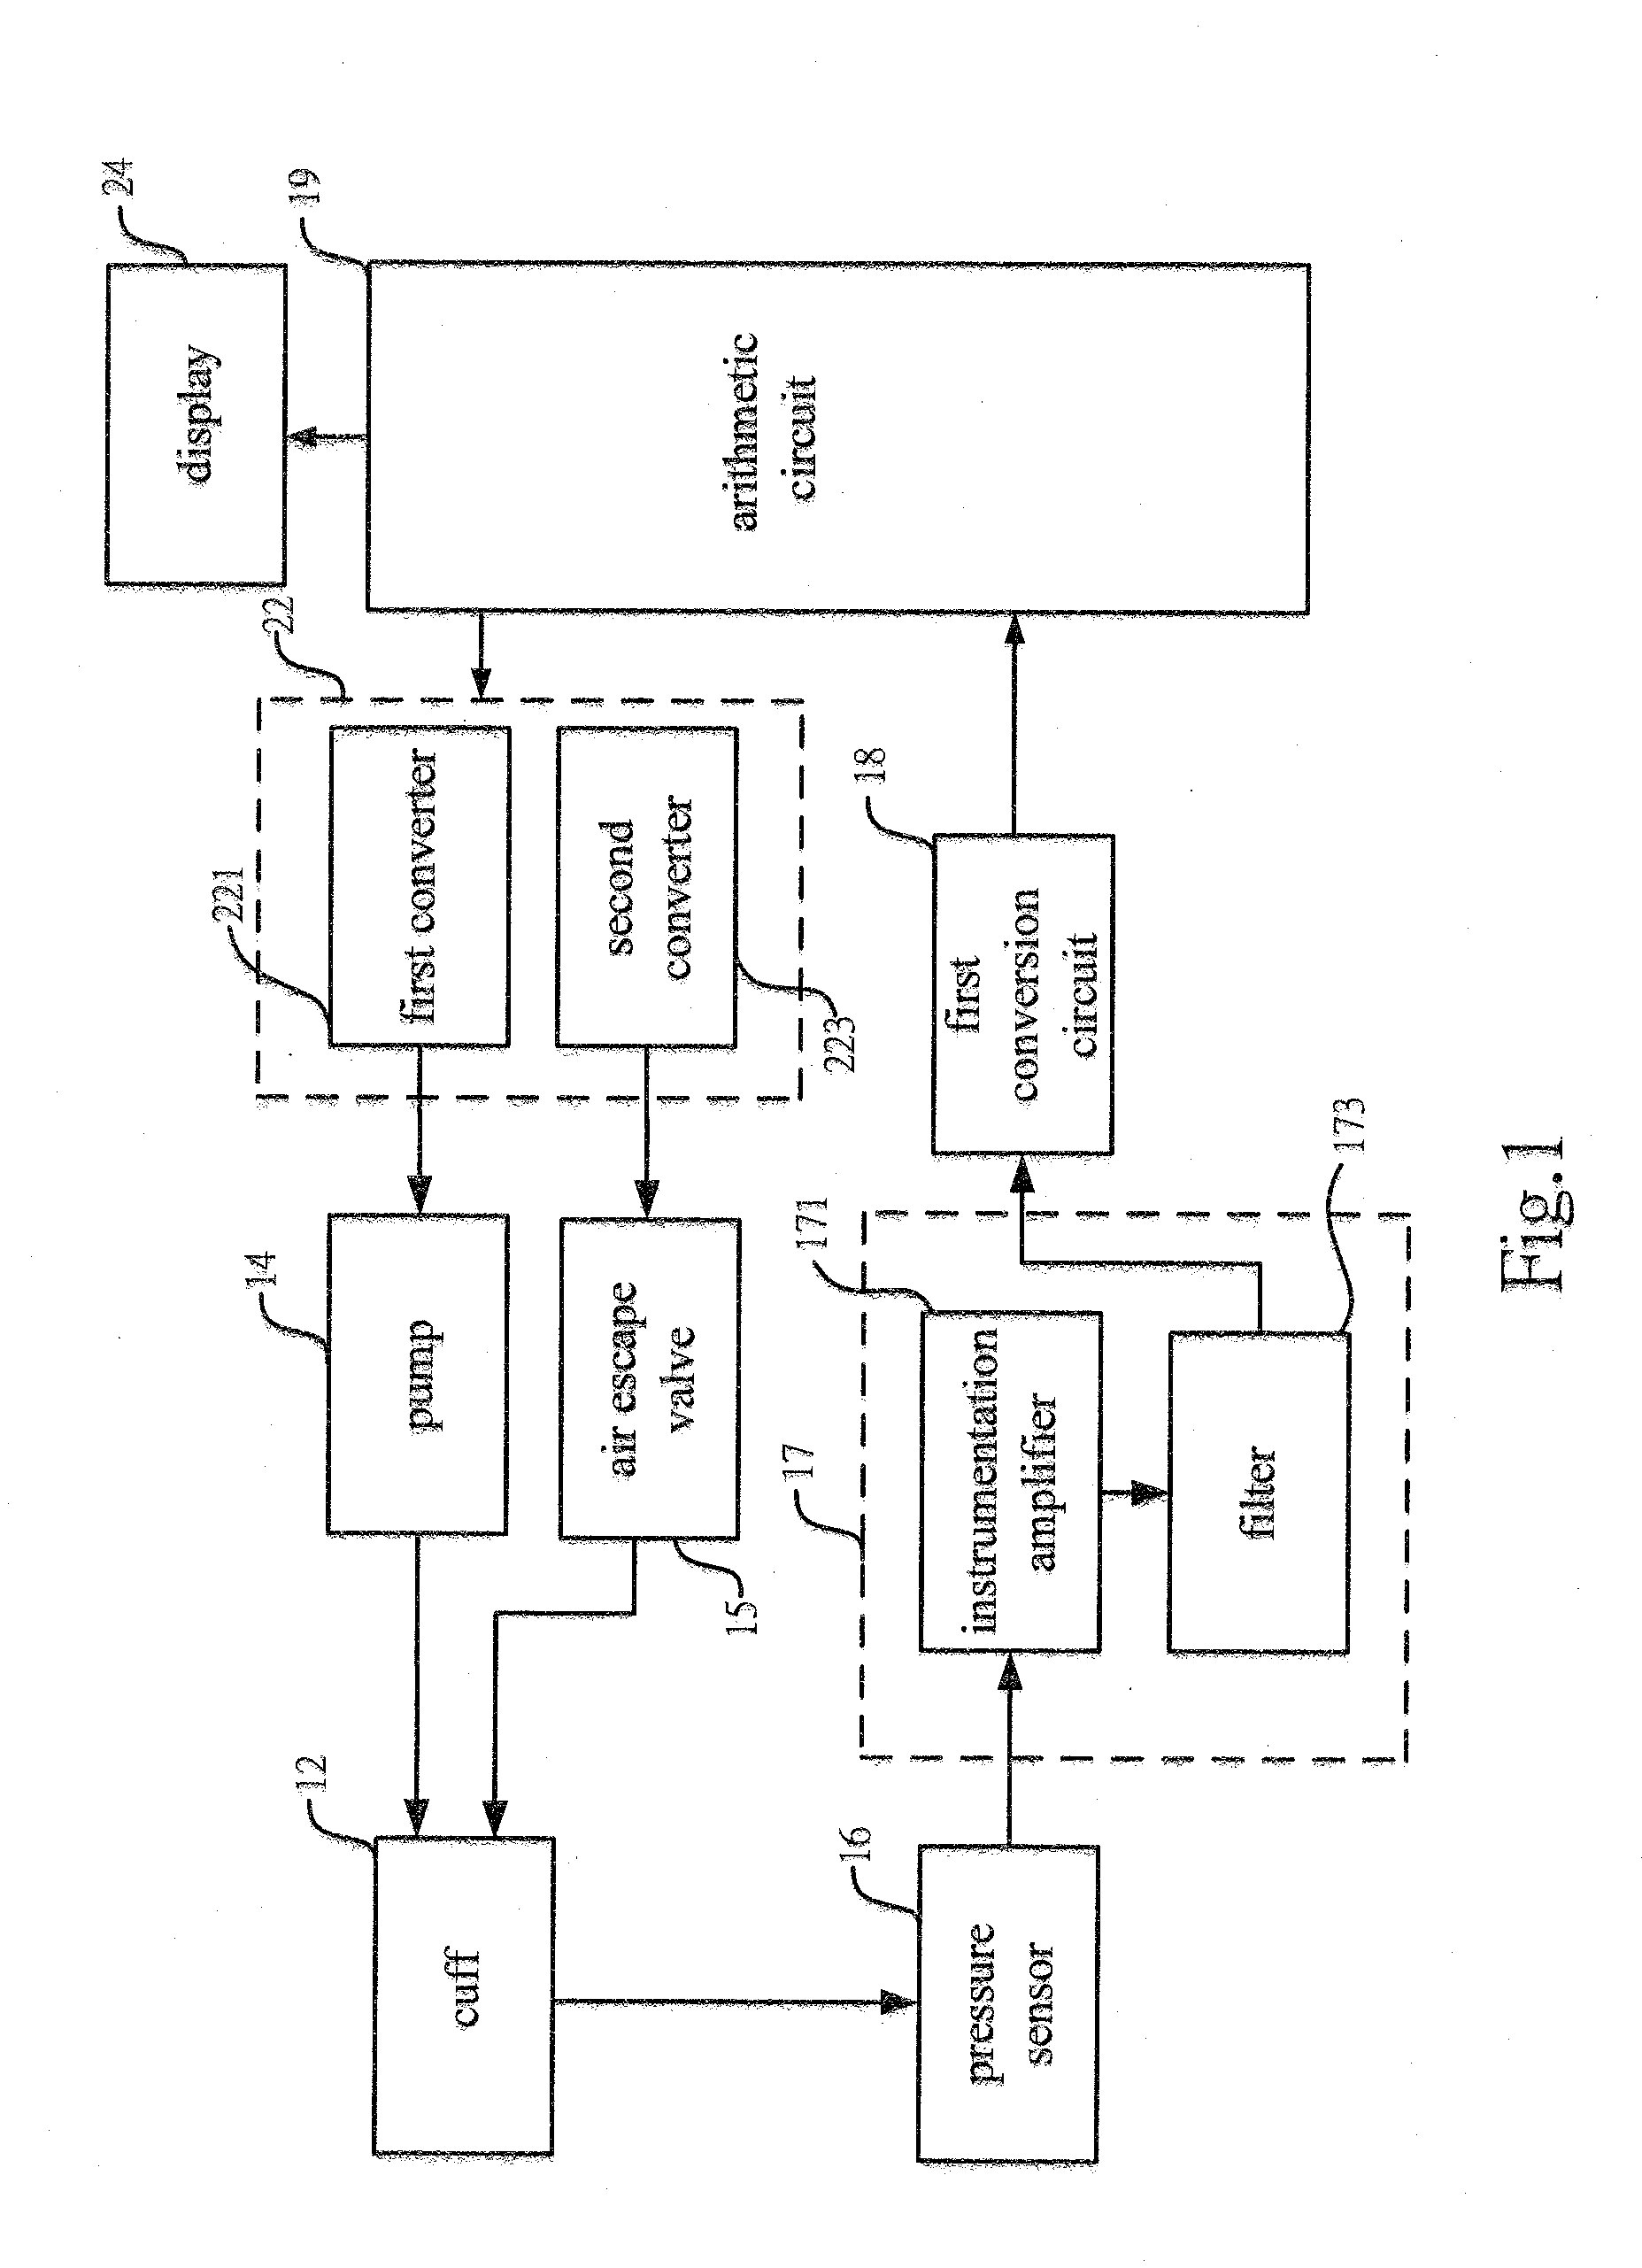 Blood pressure monitor and method for calculating blood pressure thereof